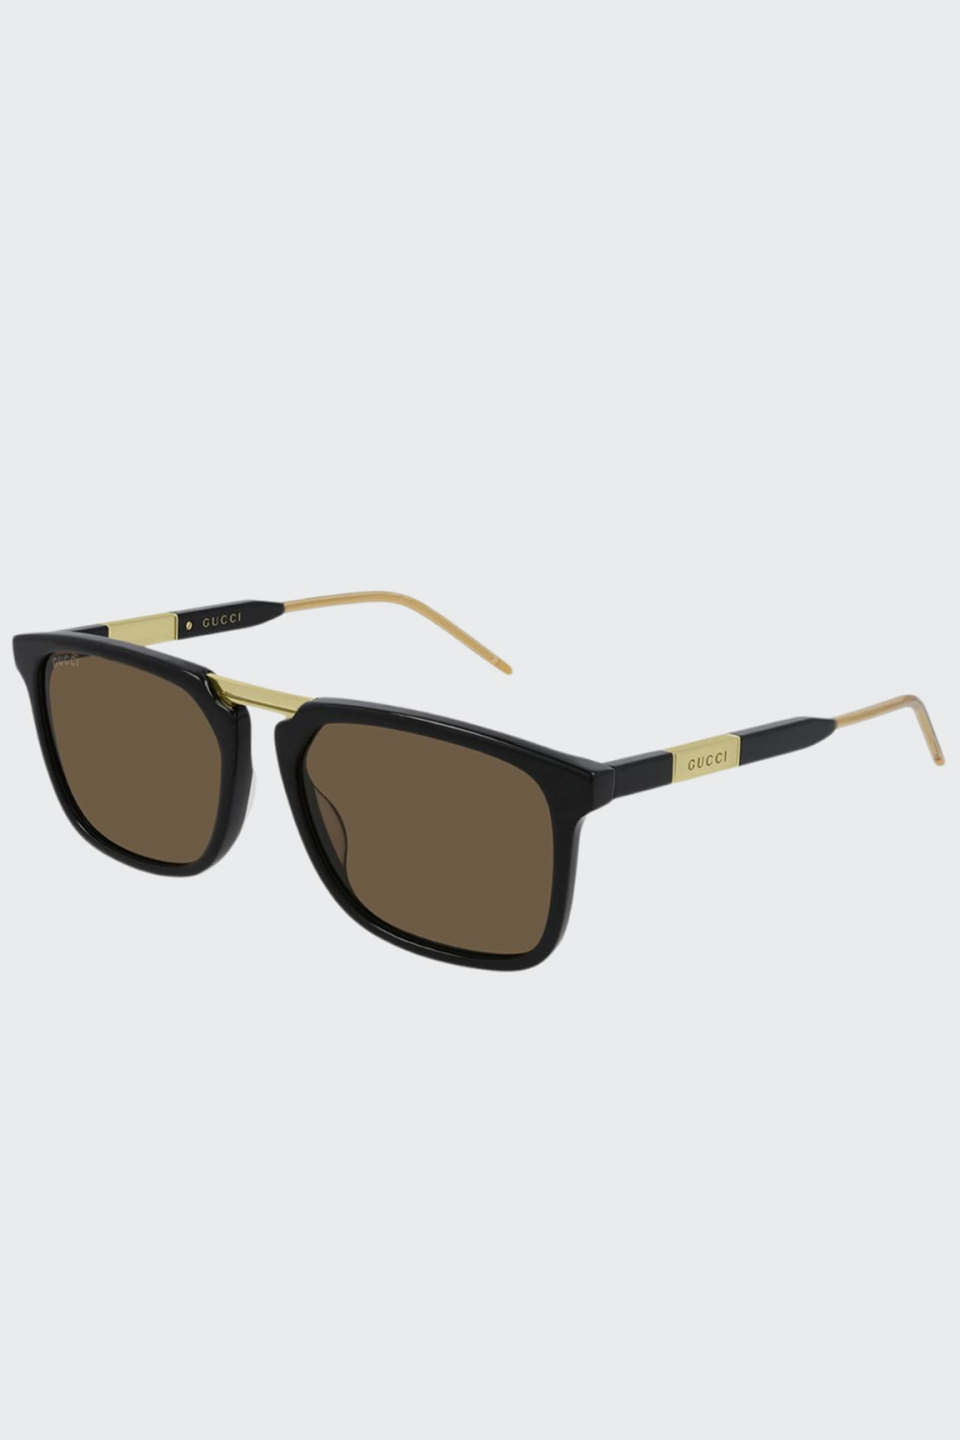 <p><strong>Gucci</strong></p><p>bergdorfgoodman.com</p><p><strong>$580.00</strong></p><p>If he needs a new pair of sunnies, look no further than Gucci. Theses rectangular lenses with gold accentuations is the ultimate luxury look. </p>